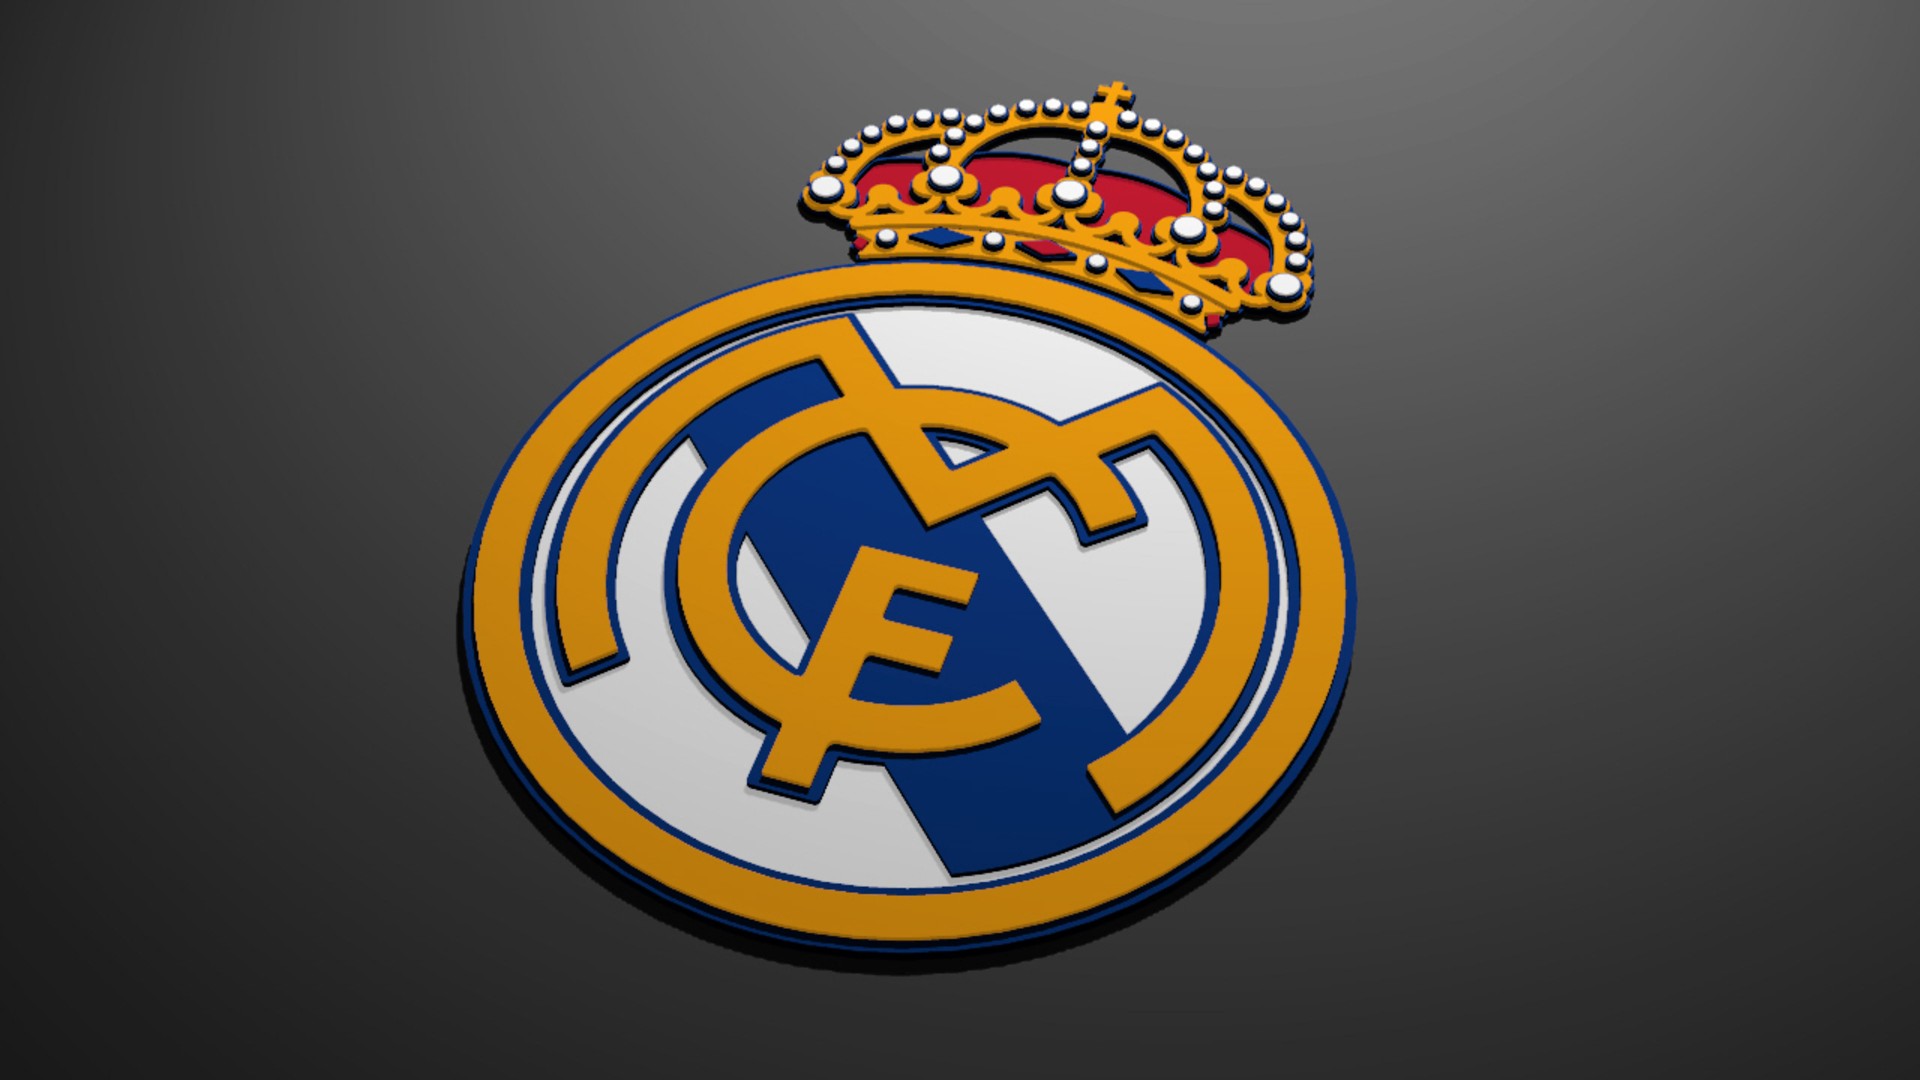 Real Madrid Desktop Wallpapers with resolution 1920x1080 pixel. You can make this wallpaper for your Mac or Windows Desktop Background, iPhone, Android or Tablet and another Smartphone device